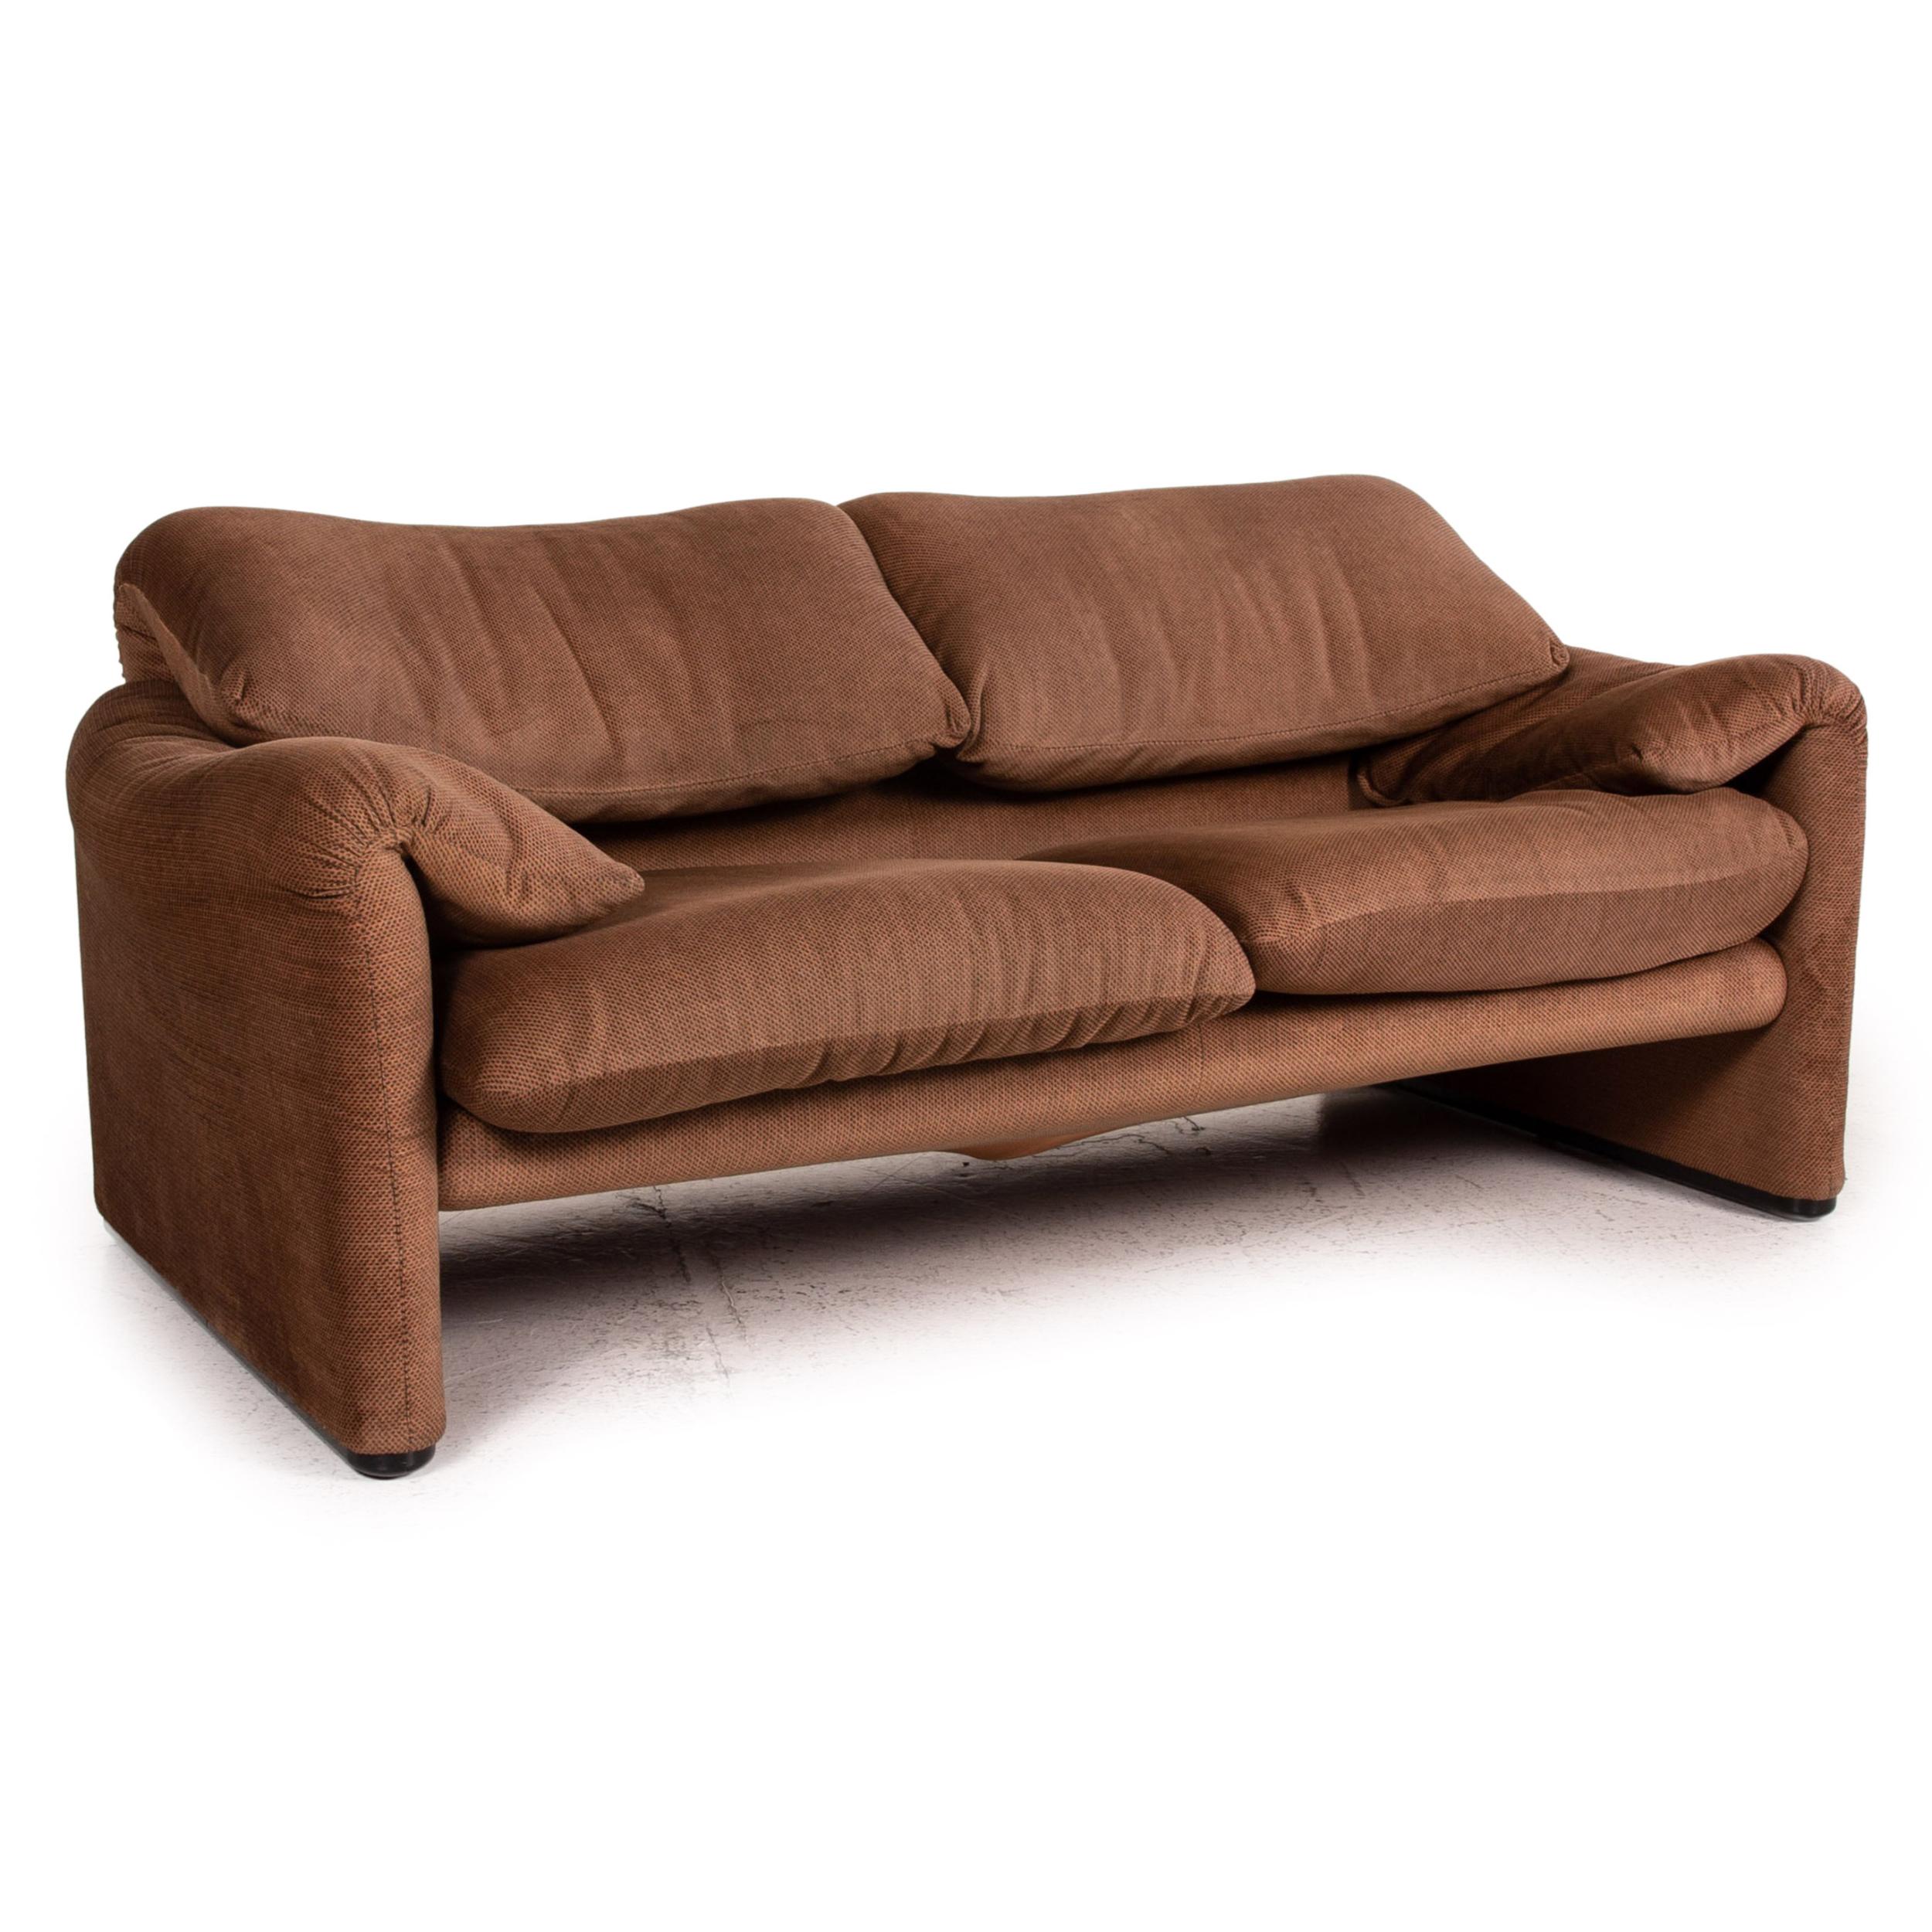 Cassina Maralunga Fabric Sofa Brown Two-Seater Function Couch 1